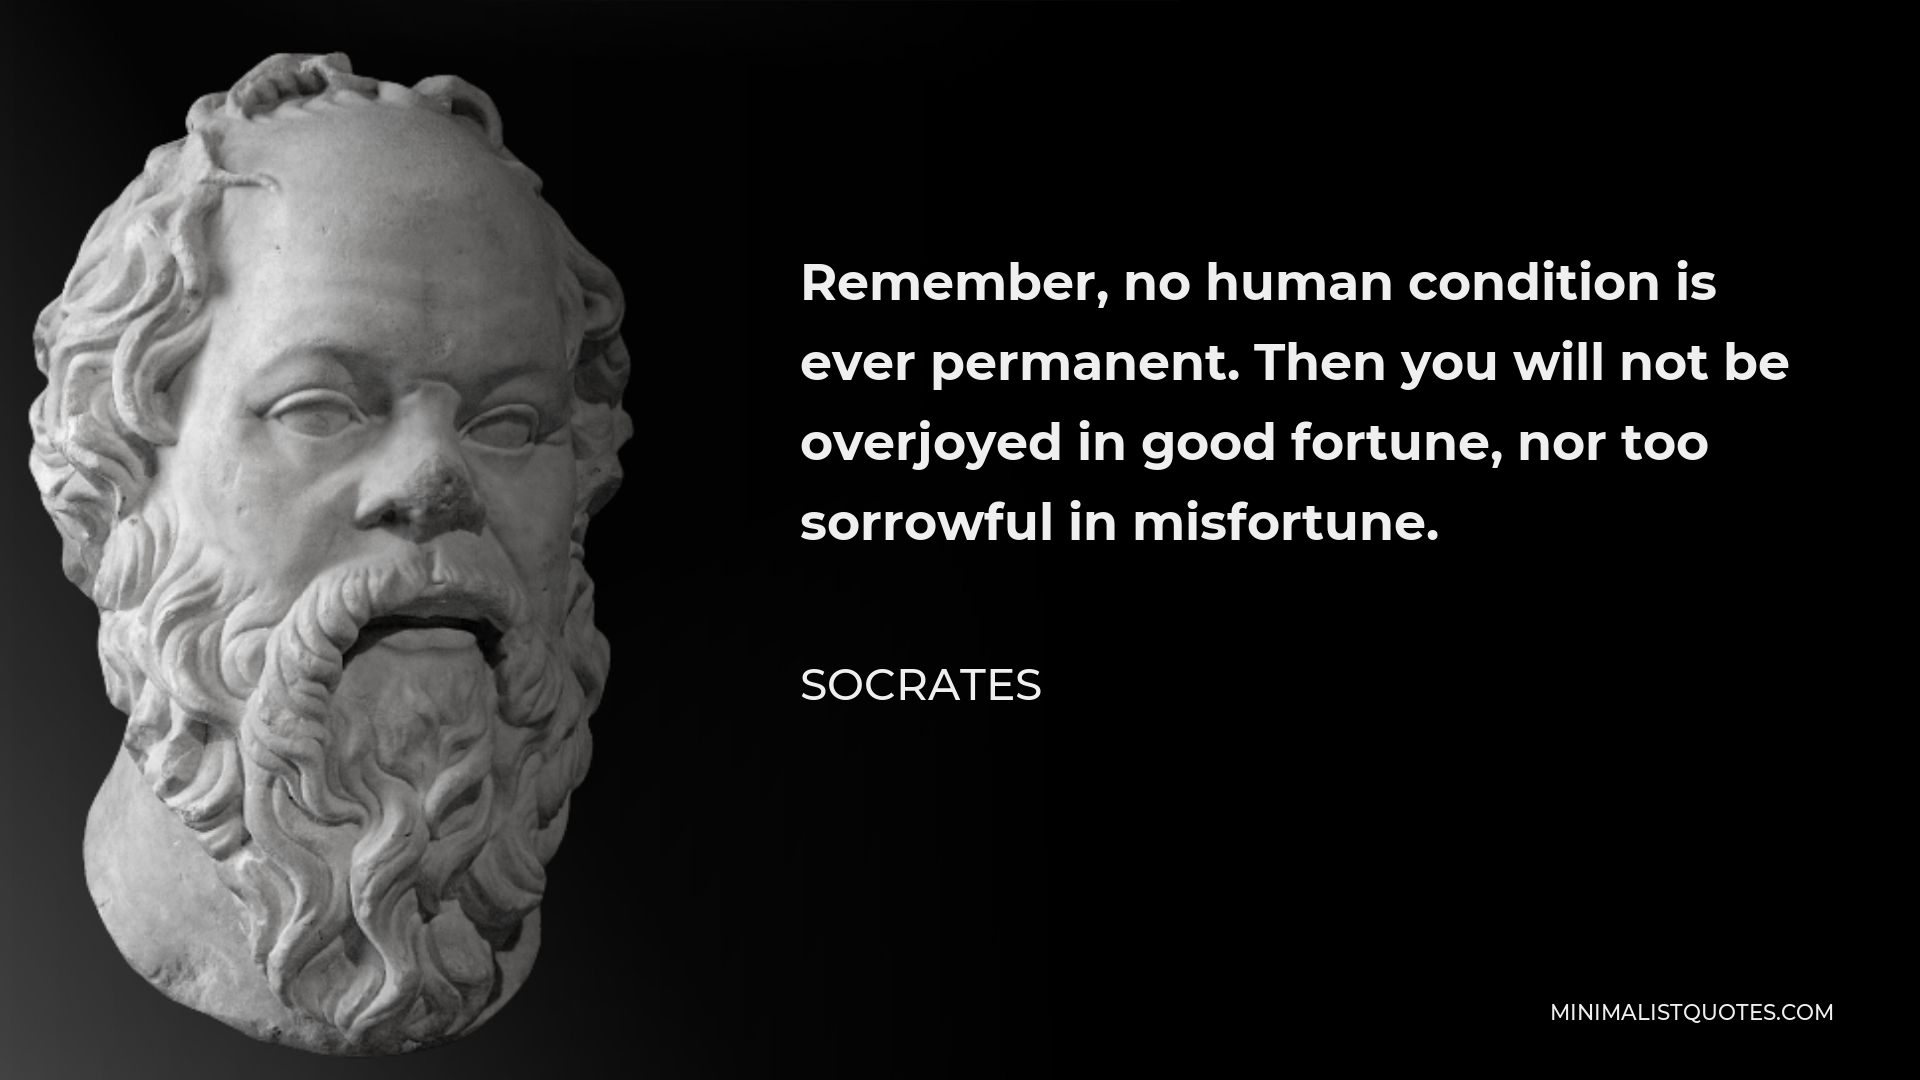 Socrates Quote - Remember, no human condition is ever permanent. Then you will not be overjoyed in good fortune, nor too sorrowful in misfortune.